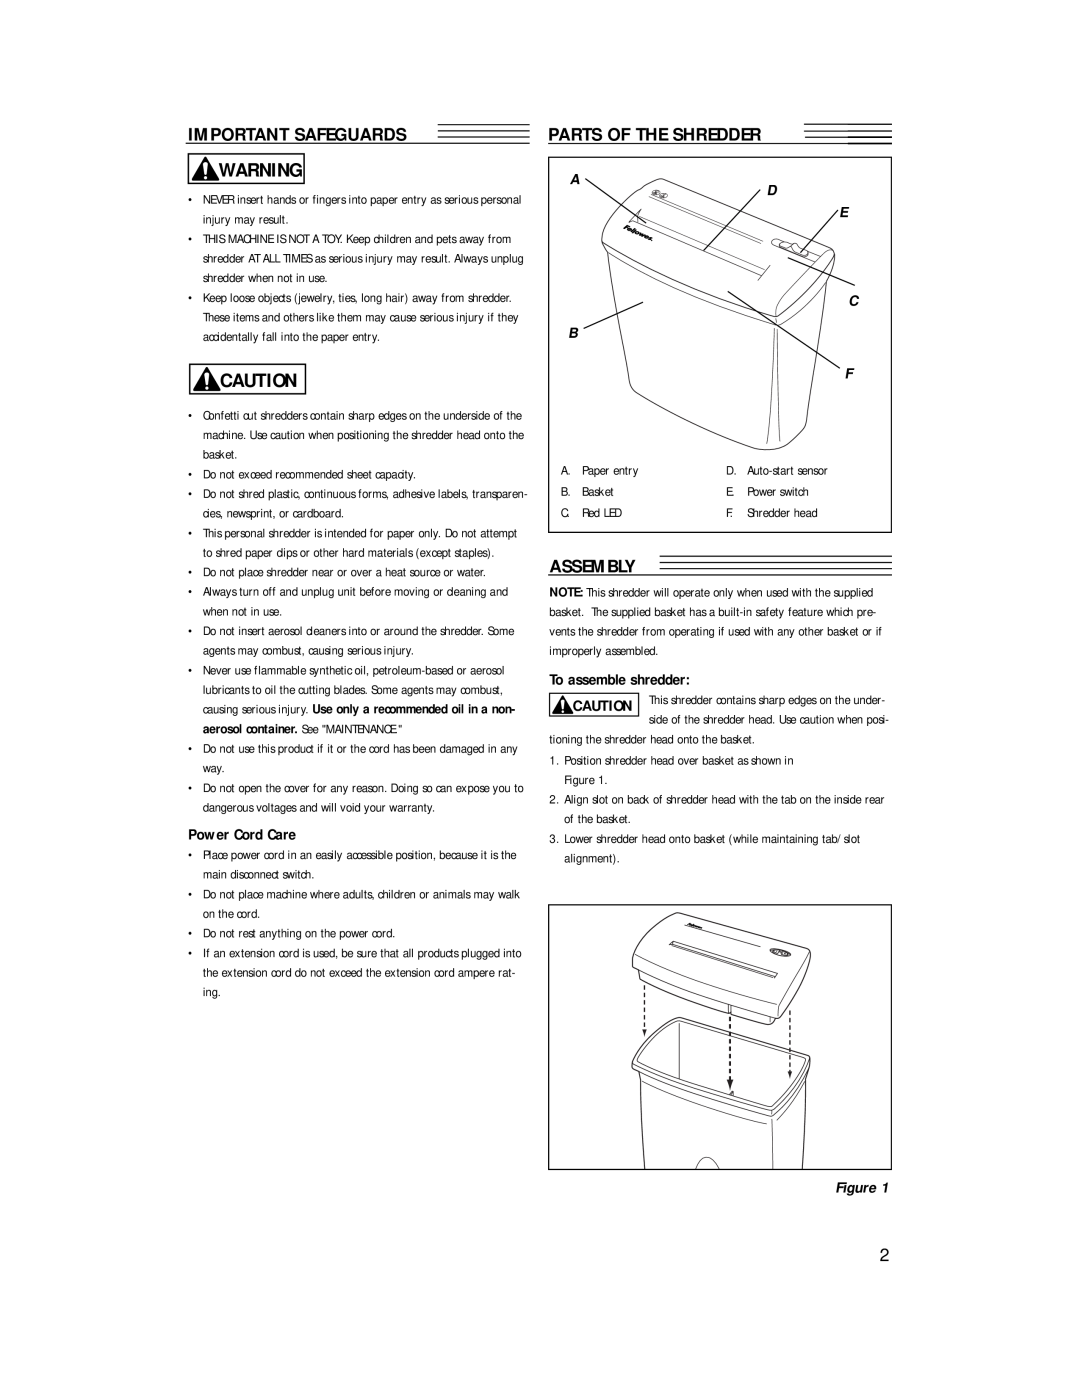 Fellowes P400C-2 Important Safeguards, Parts Of The Shredder, Assembly, Power Cord Care, E C B F, To assemble shredder 